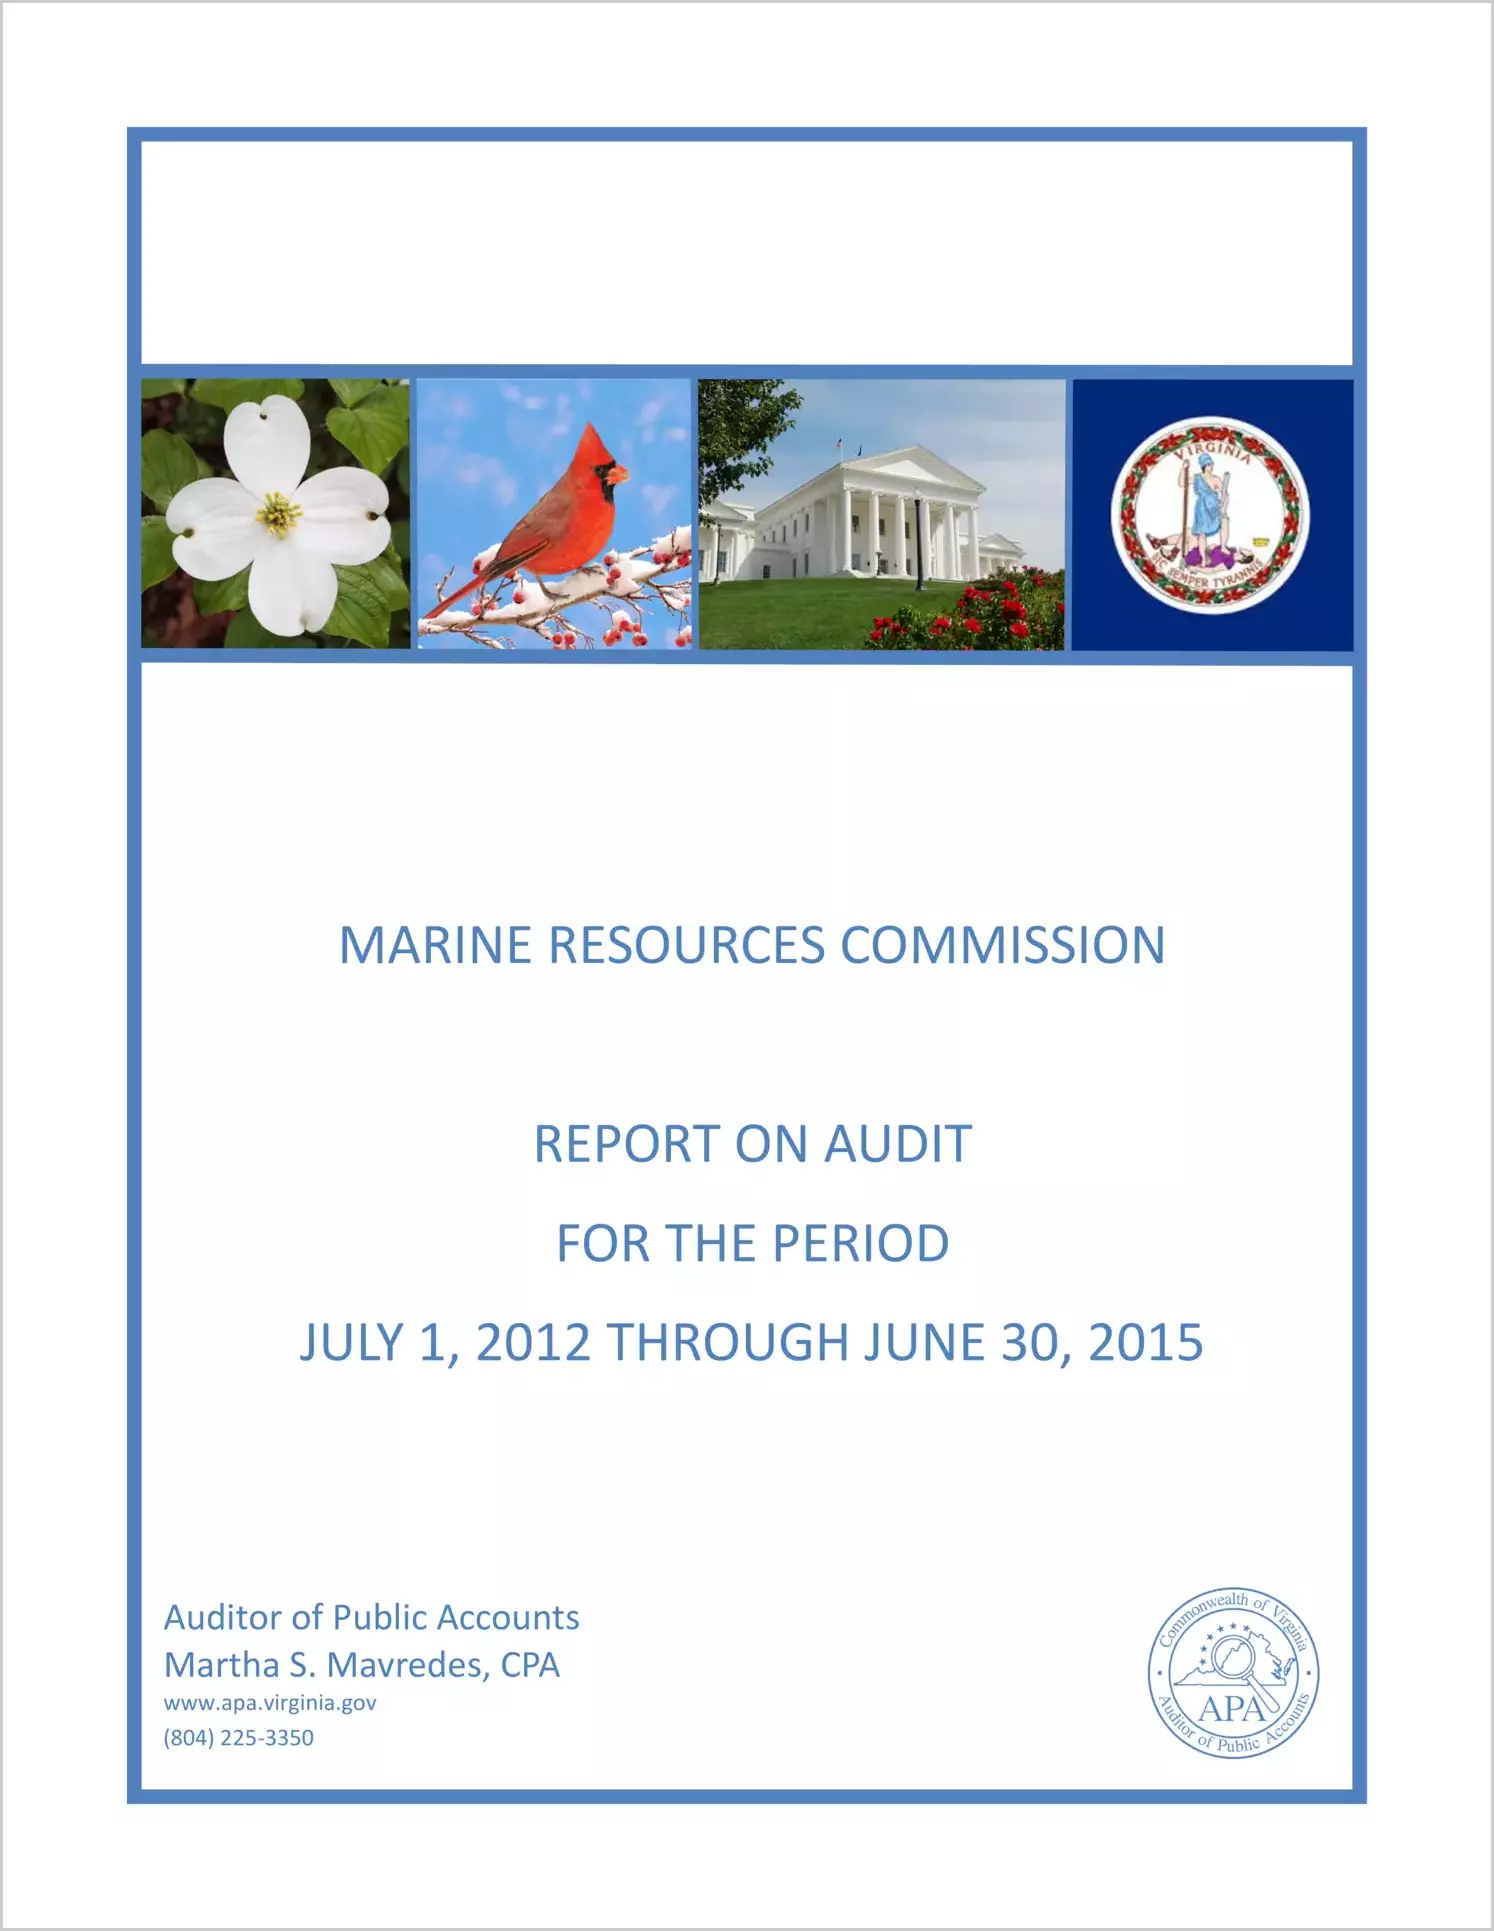 Virginia Marine Resources Commission Report on Audit for the Period July 1, 2013 through June 30, 2015